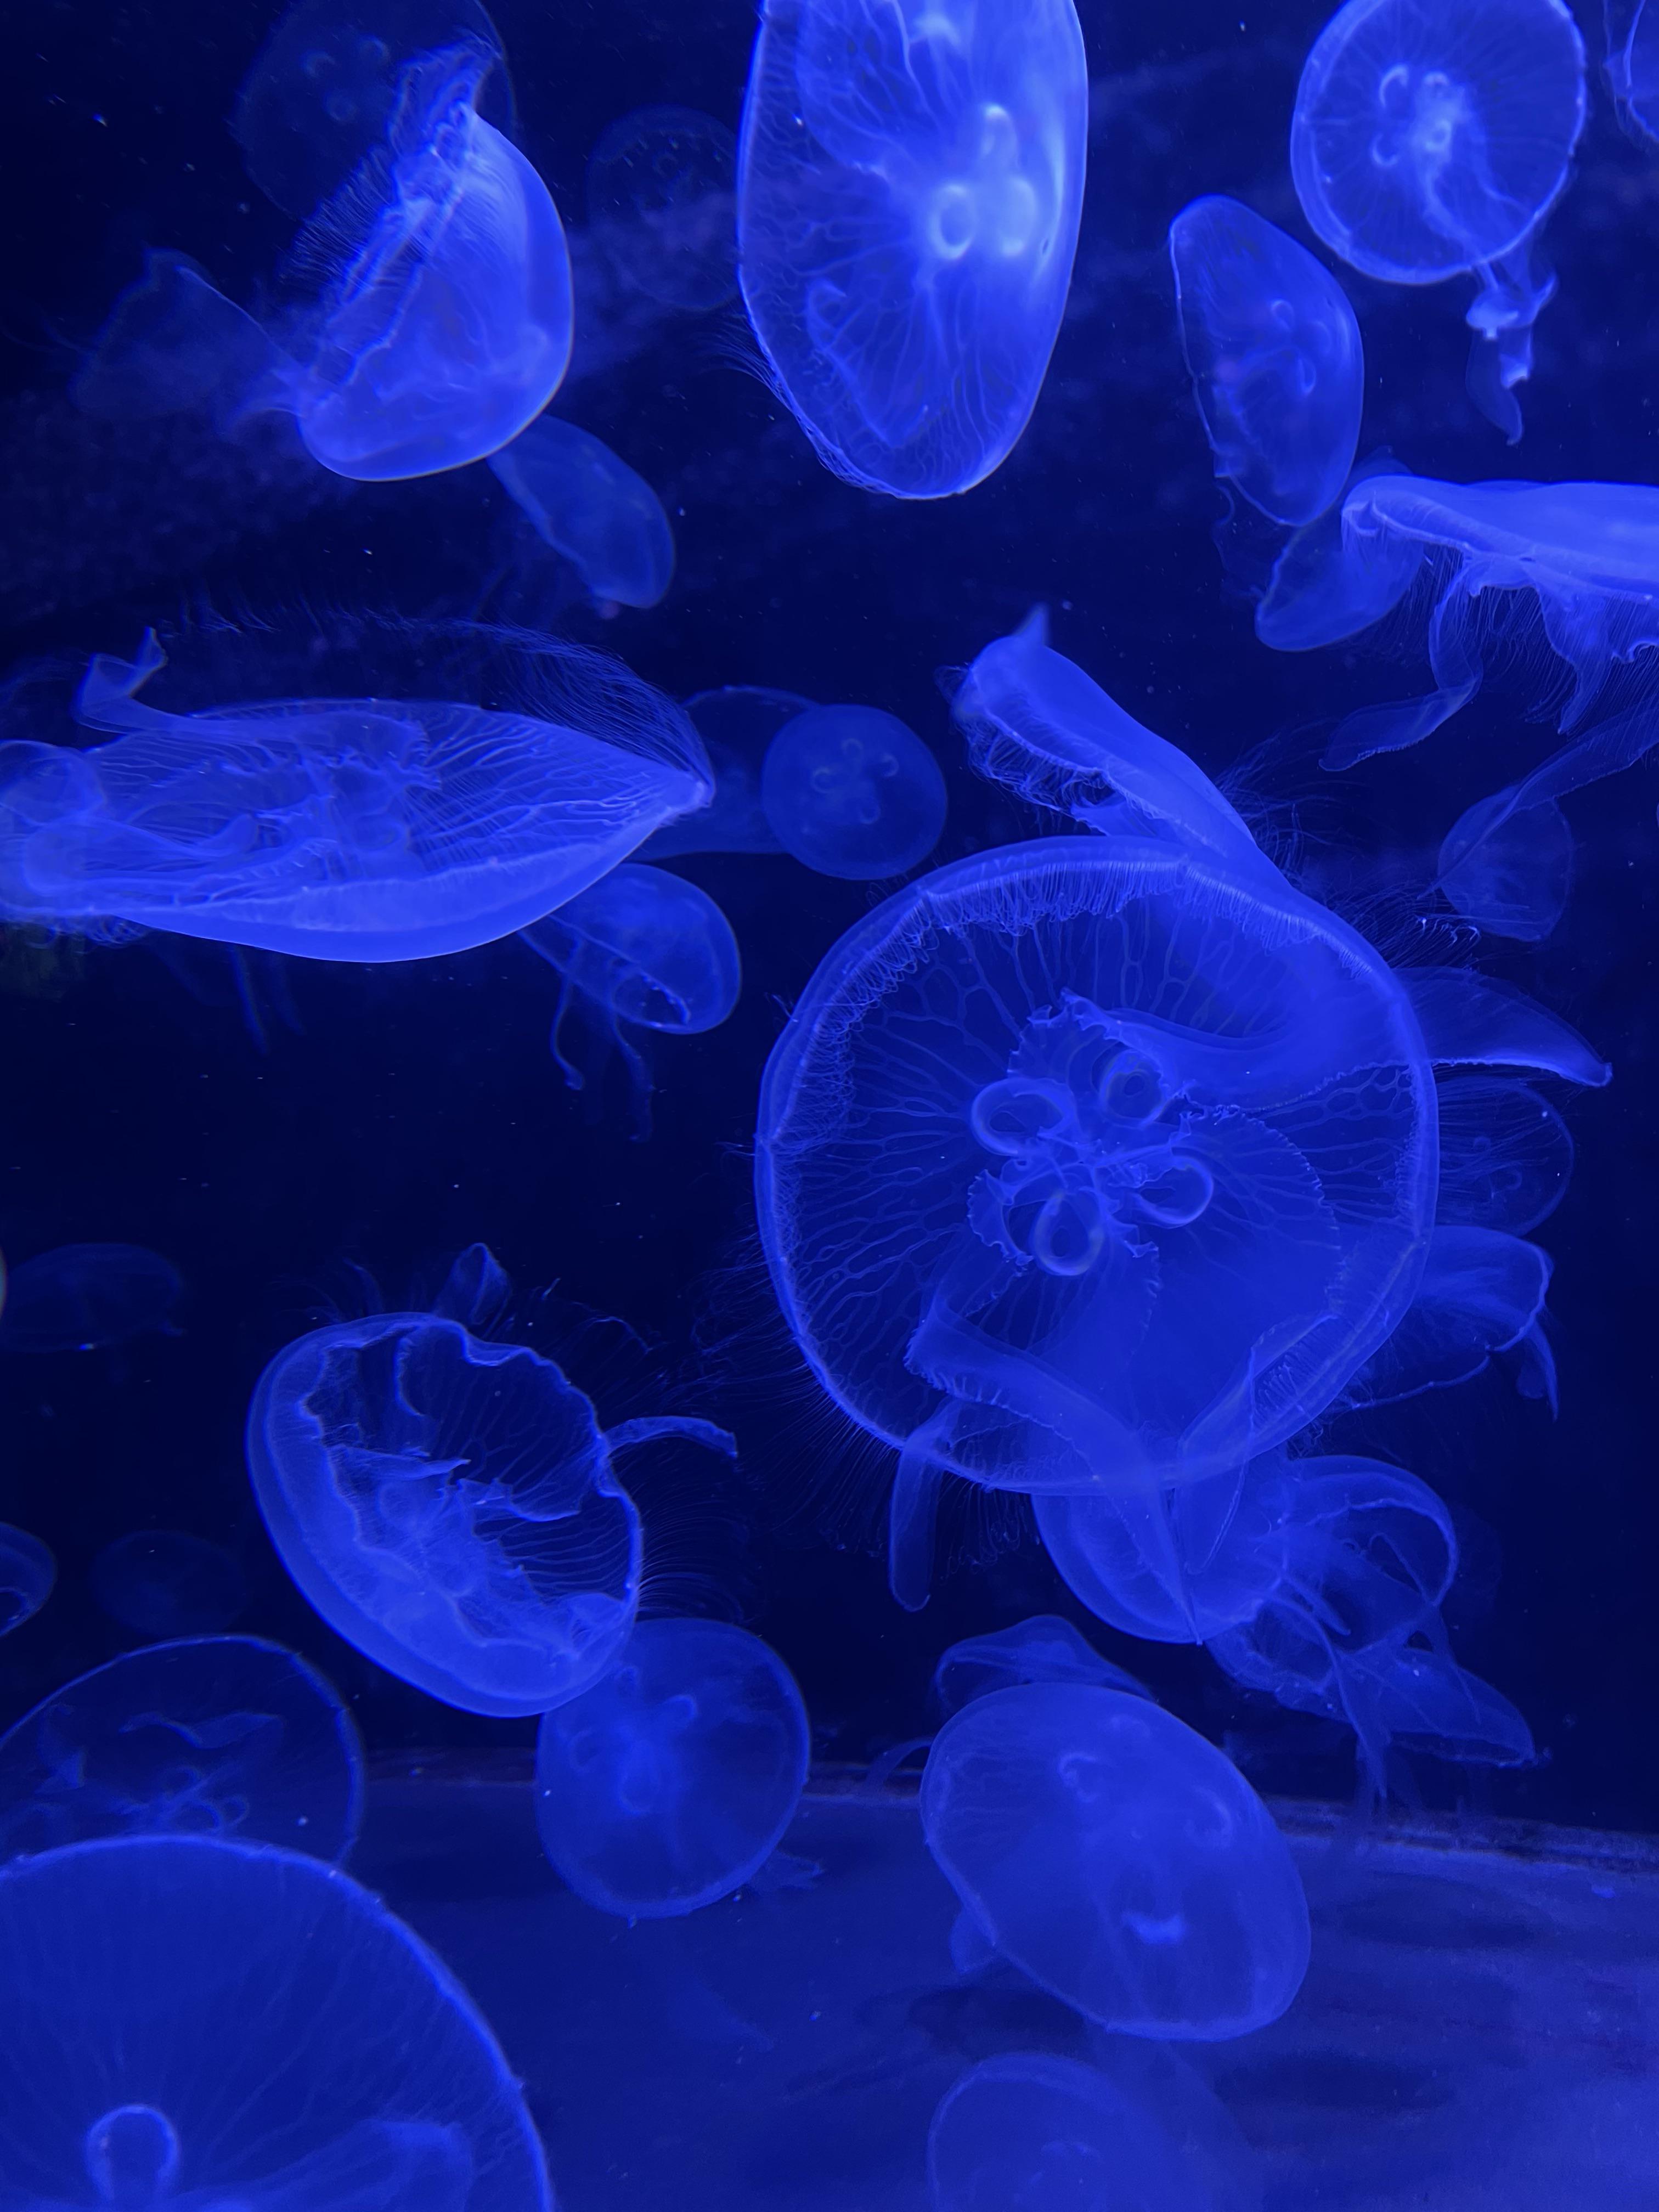 A group of jellyfish swimming in a blue ocean. - Jellyfish